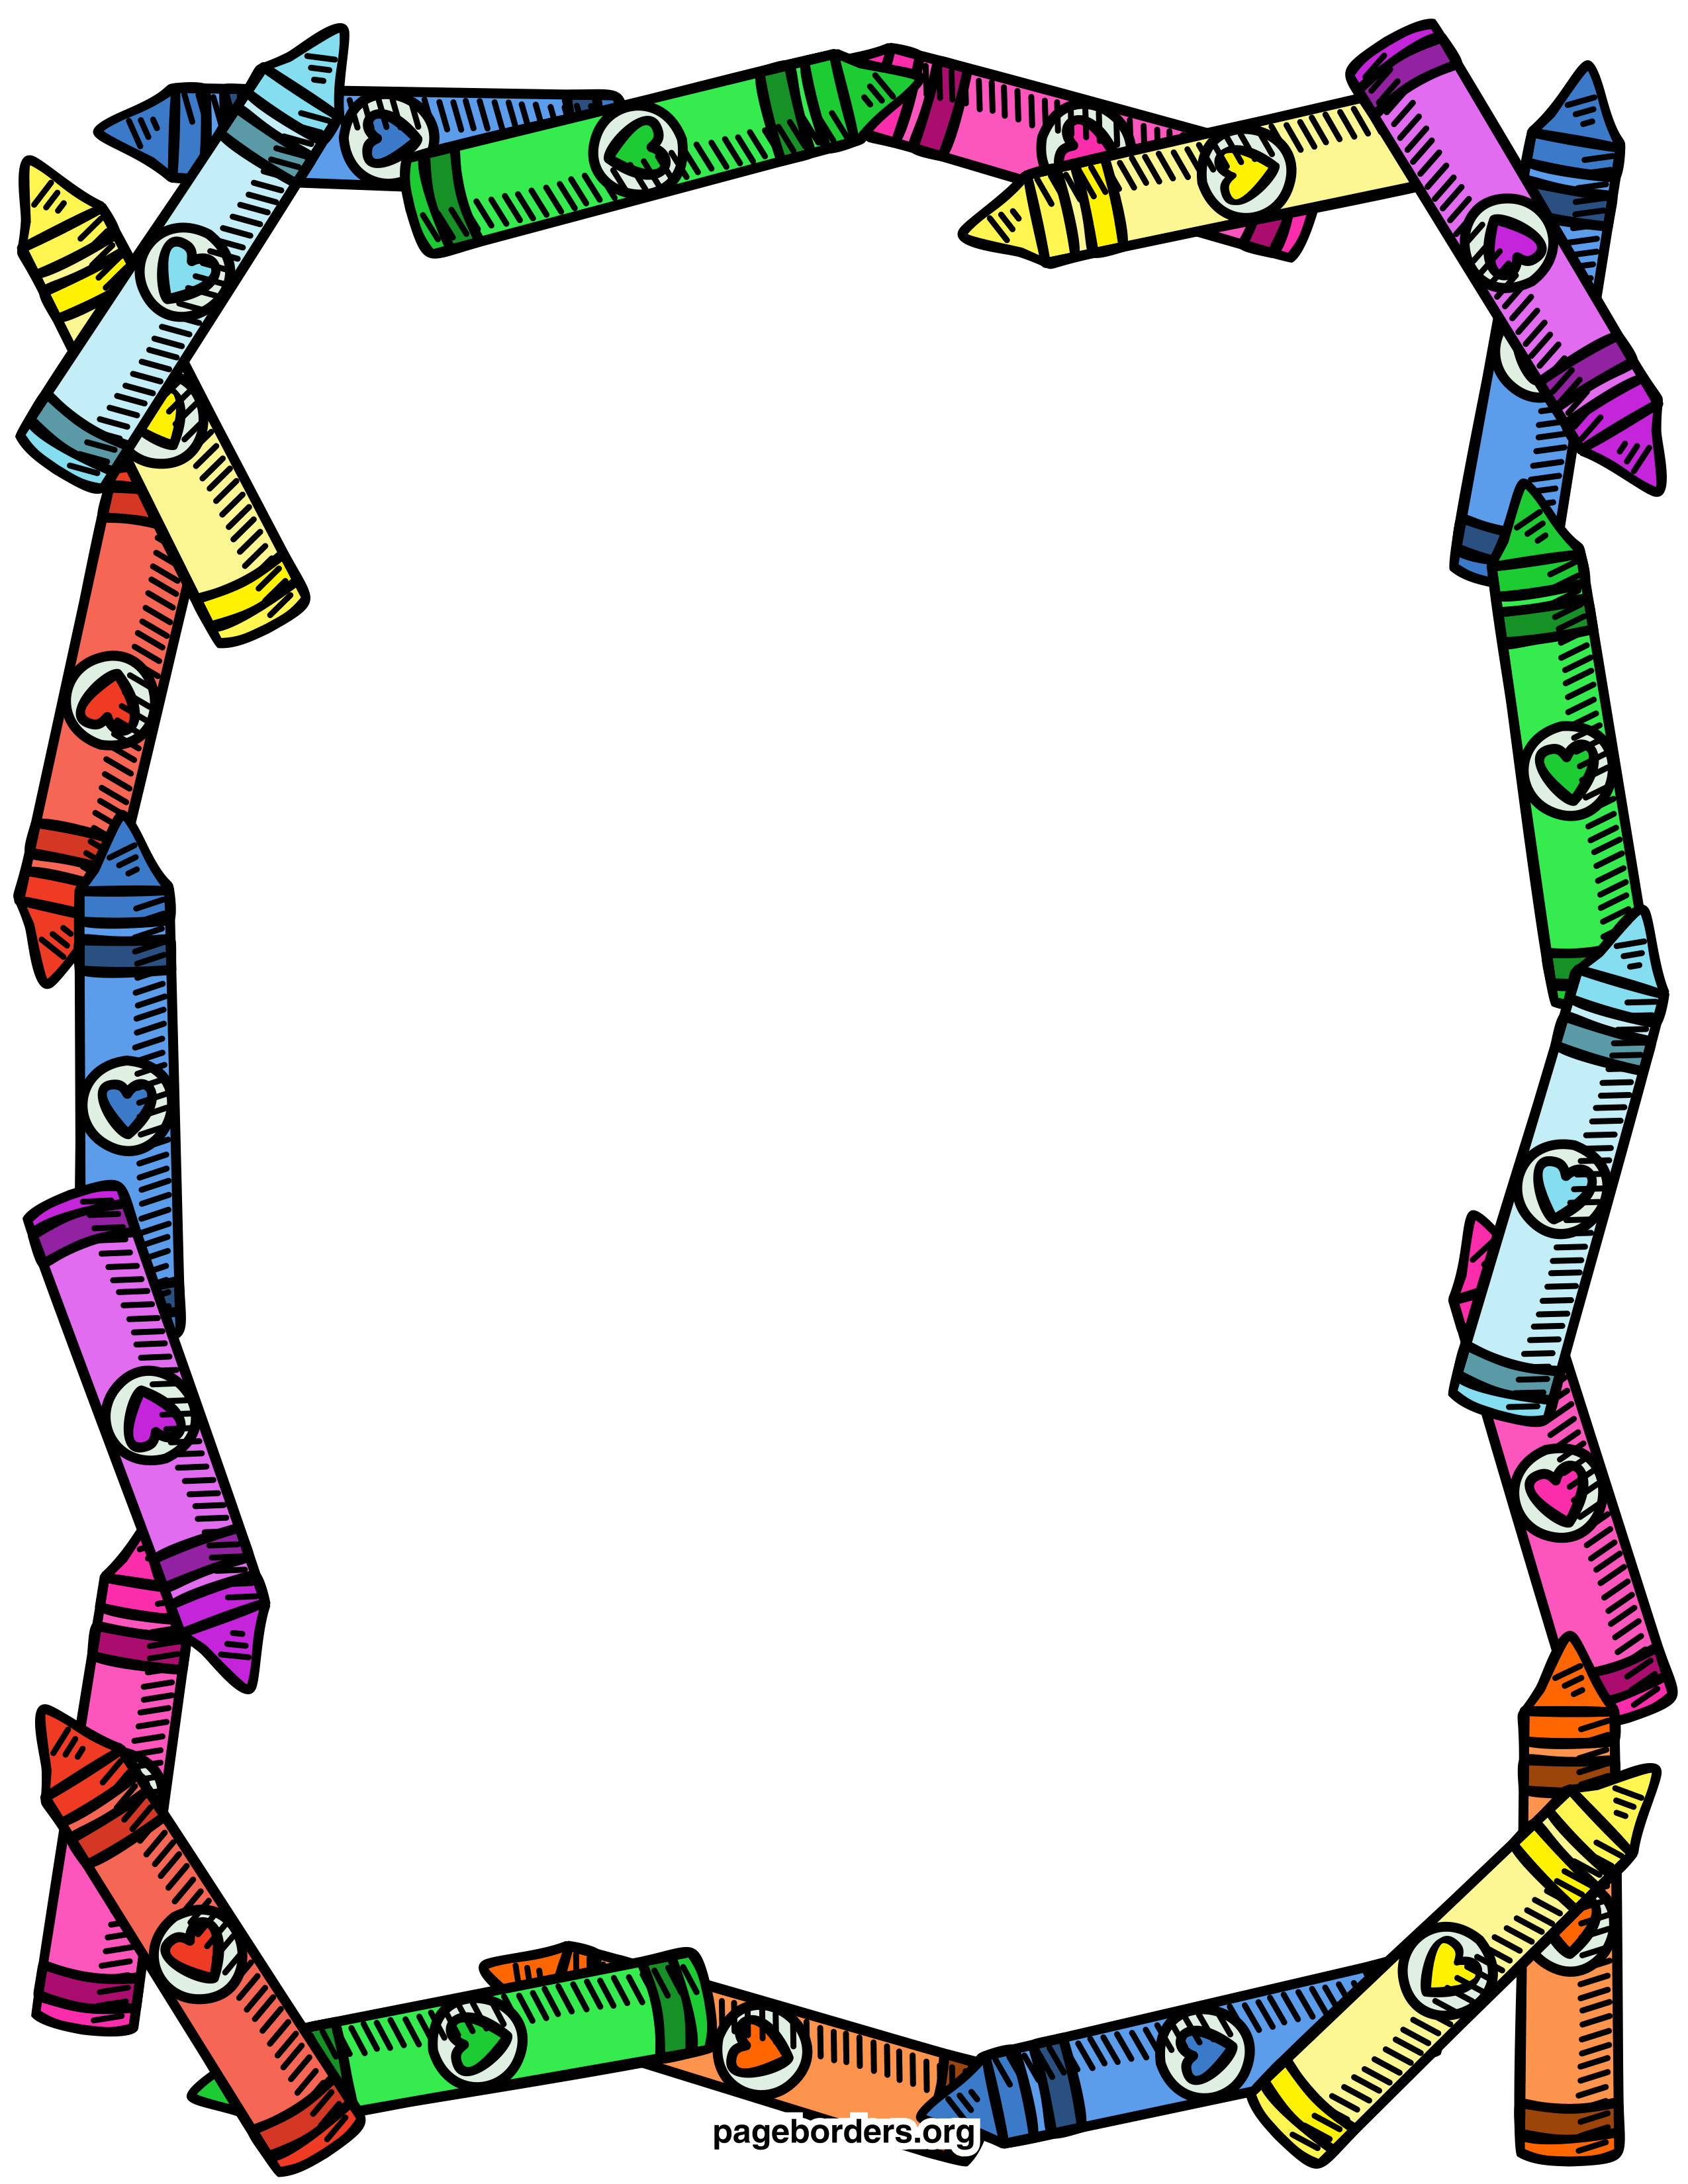 Clipart frames for word